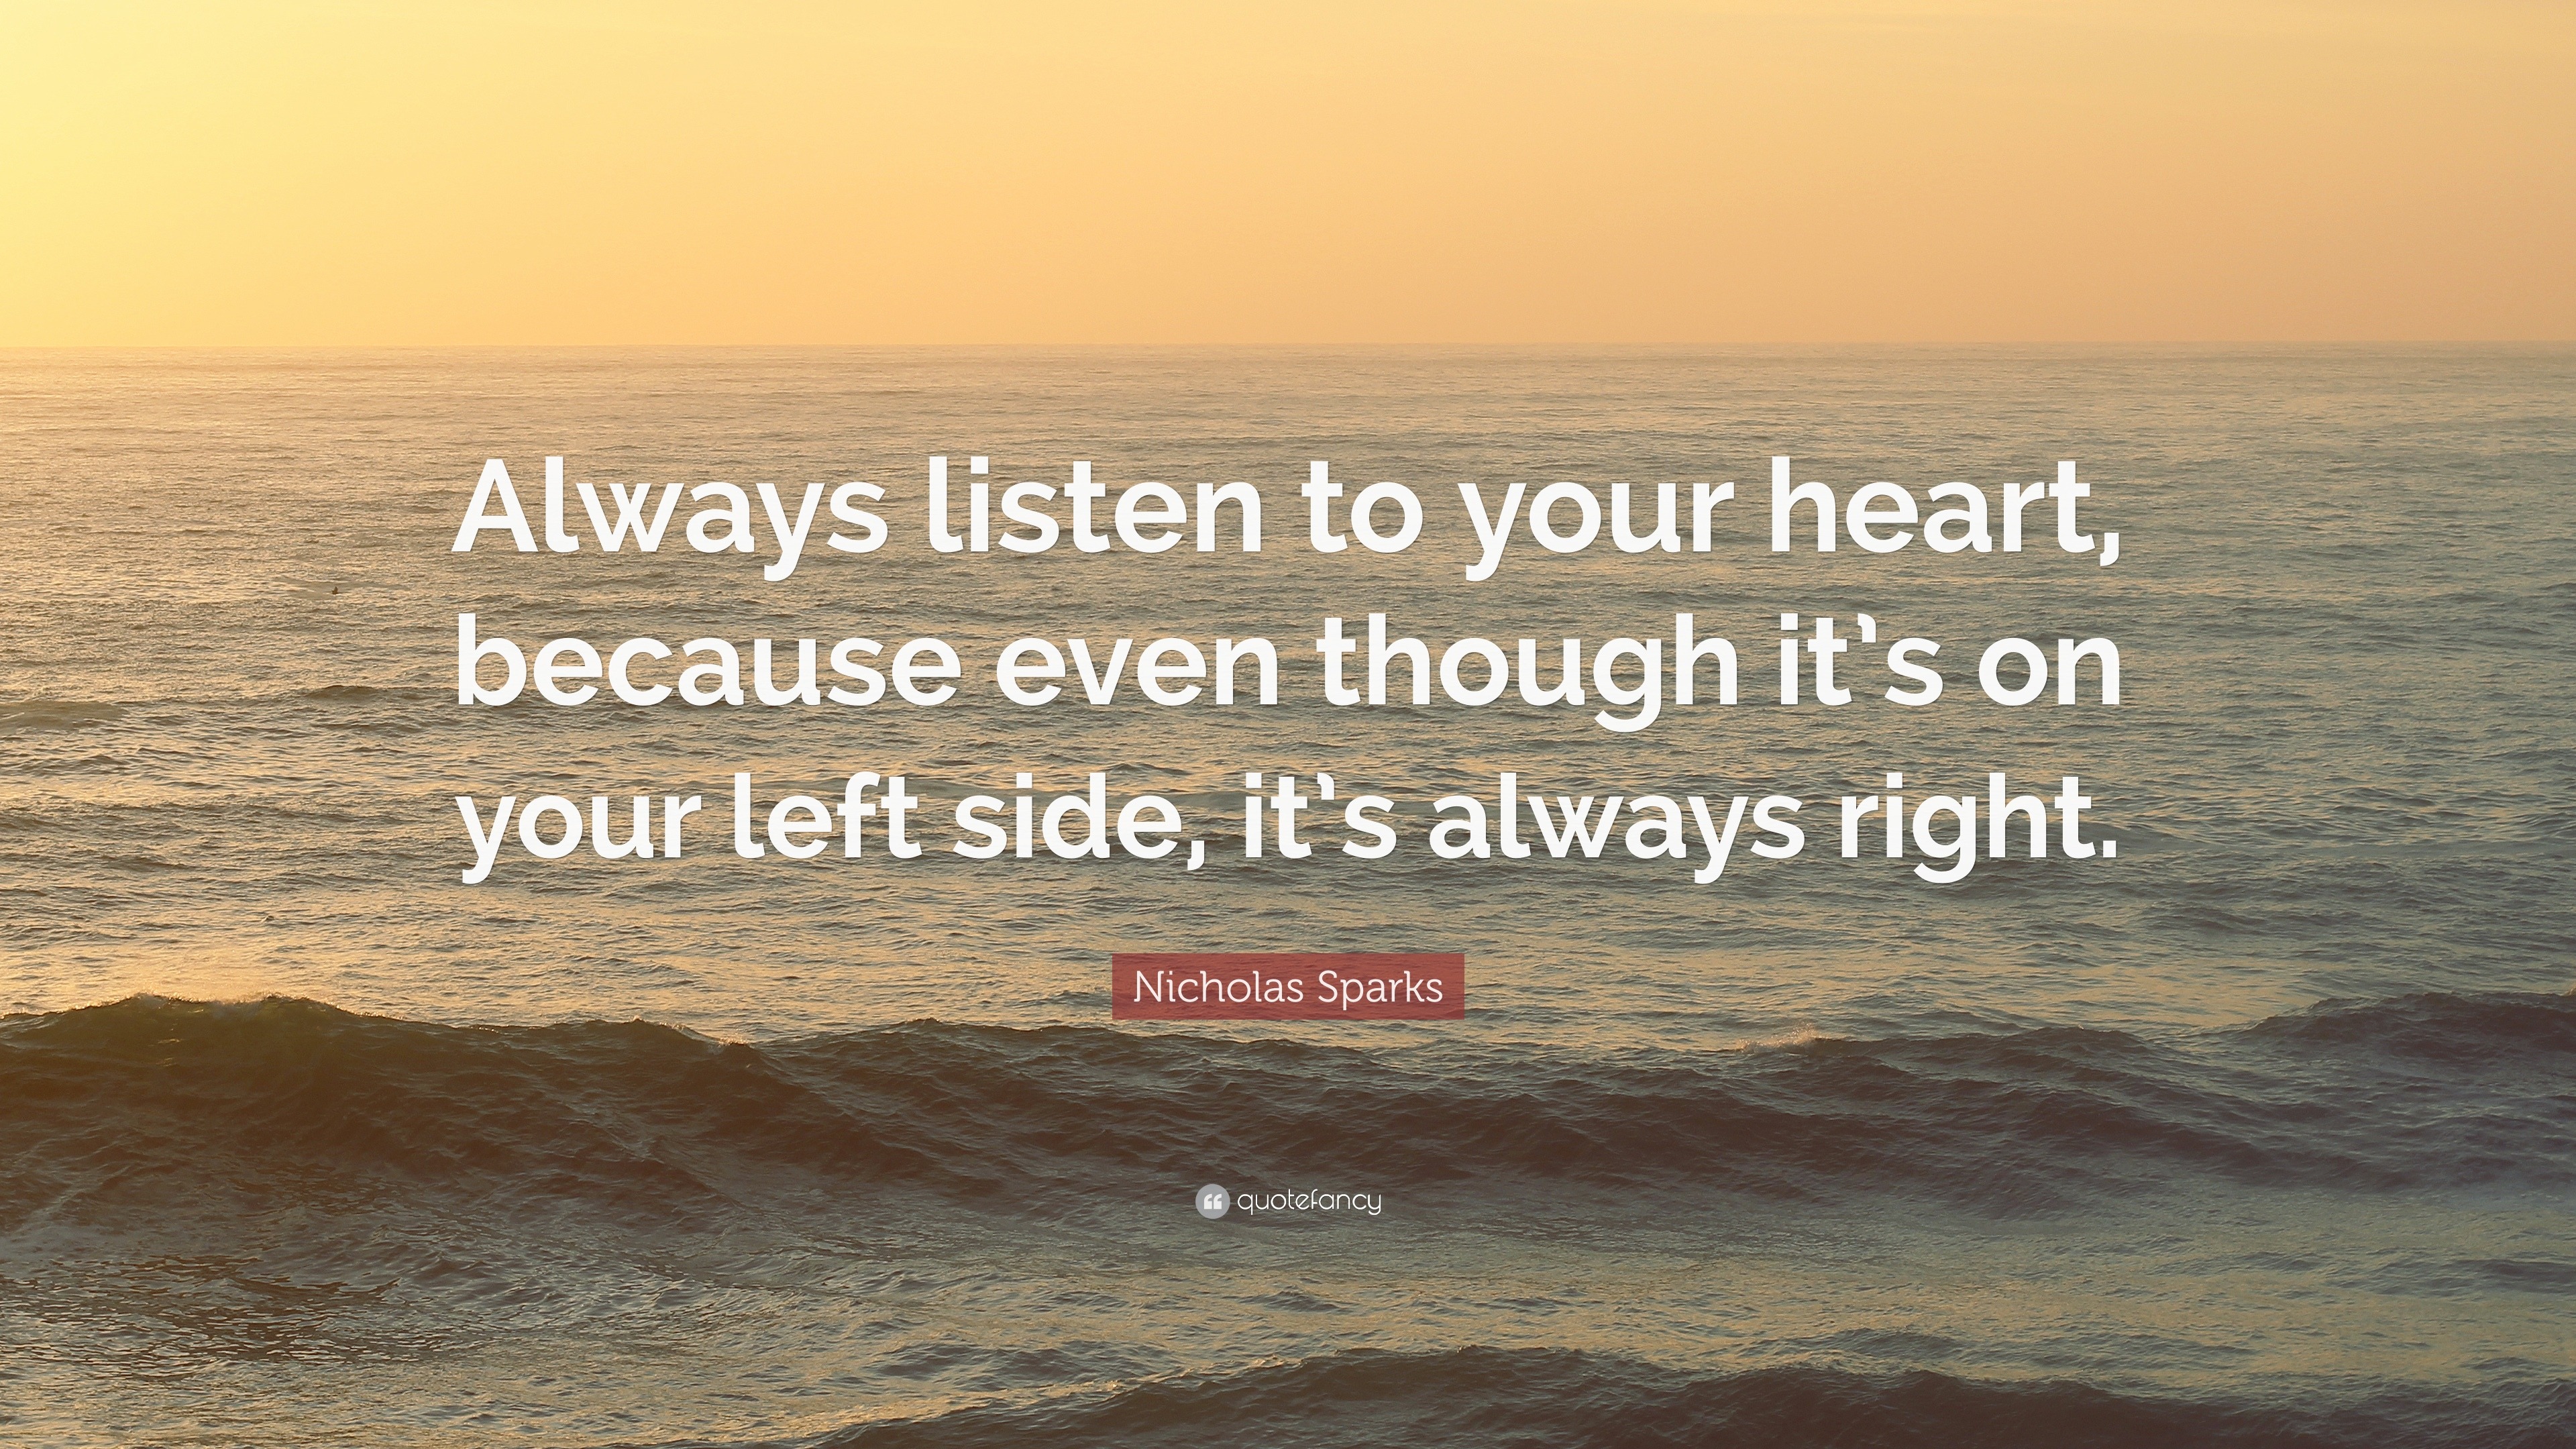 Nicholas Sparks Quote: “Always Listen To Your Heart, Because Even